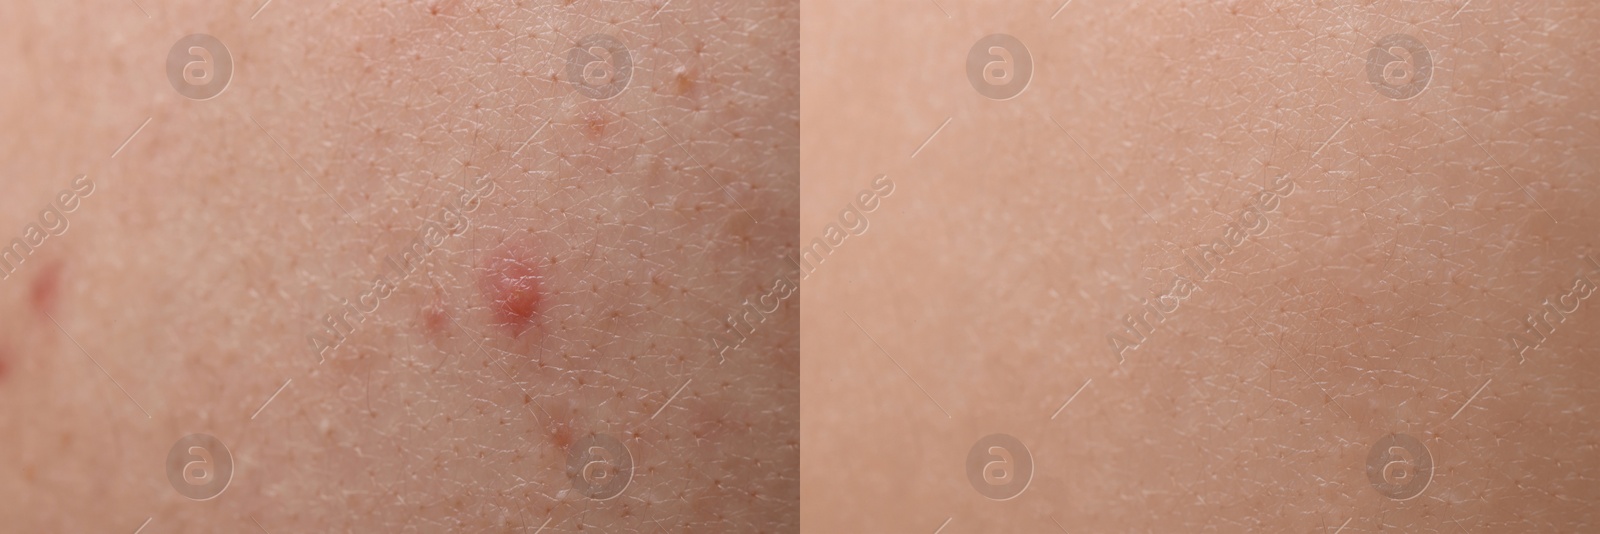 Image of Collage with photos of person suffering from acne before and after treatment, closeup. Banner design showing affected and healthy skin